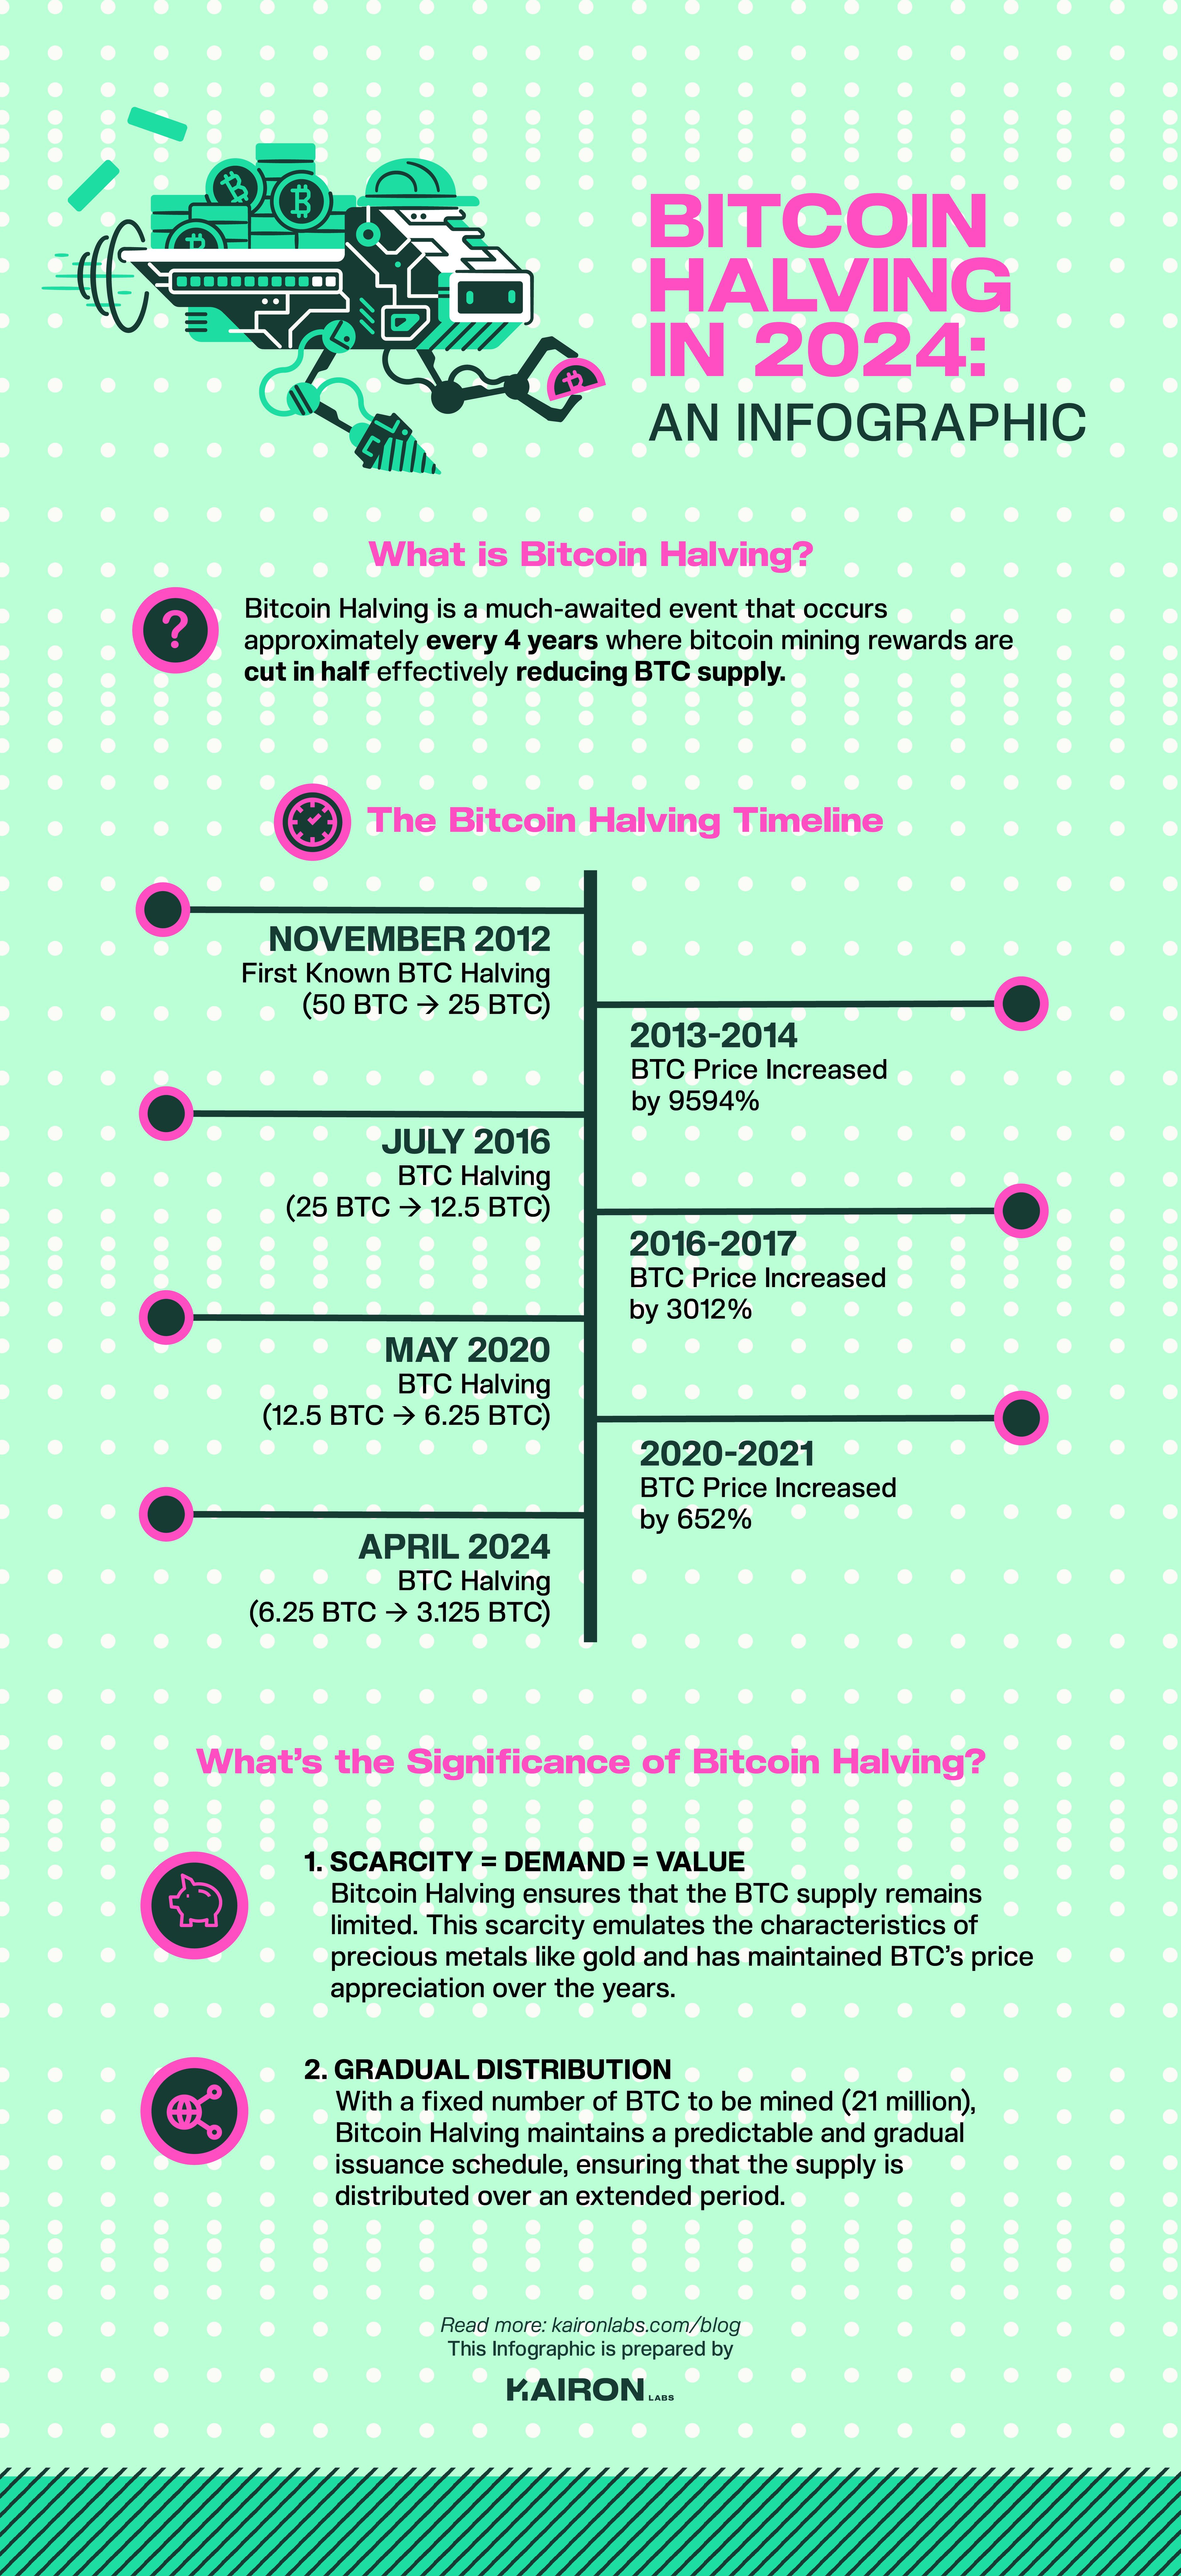 Bitcoin Halving in 2024: An Infographic